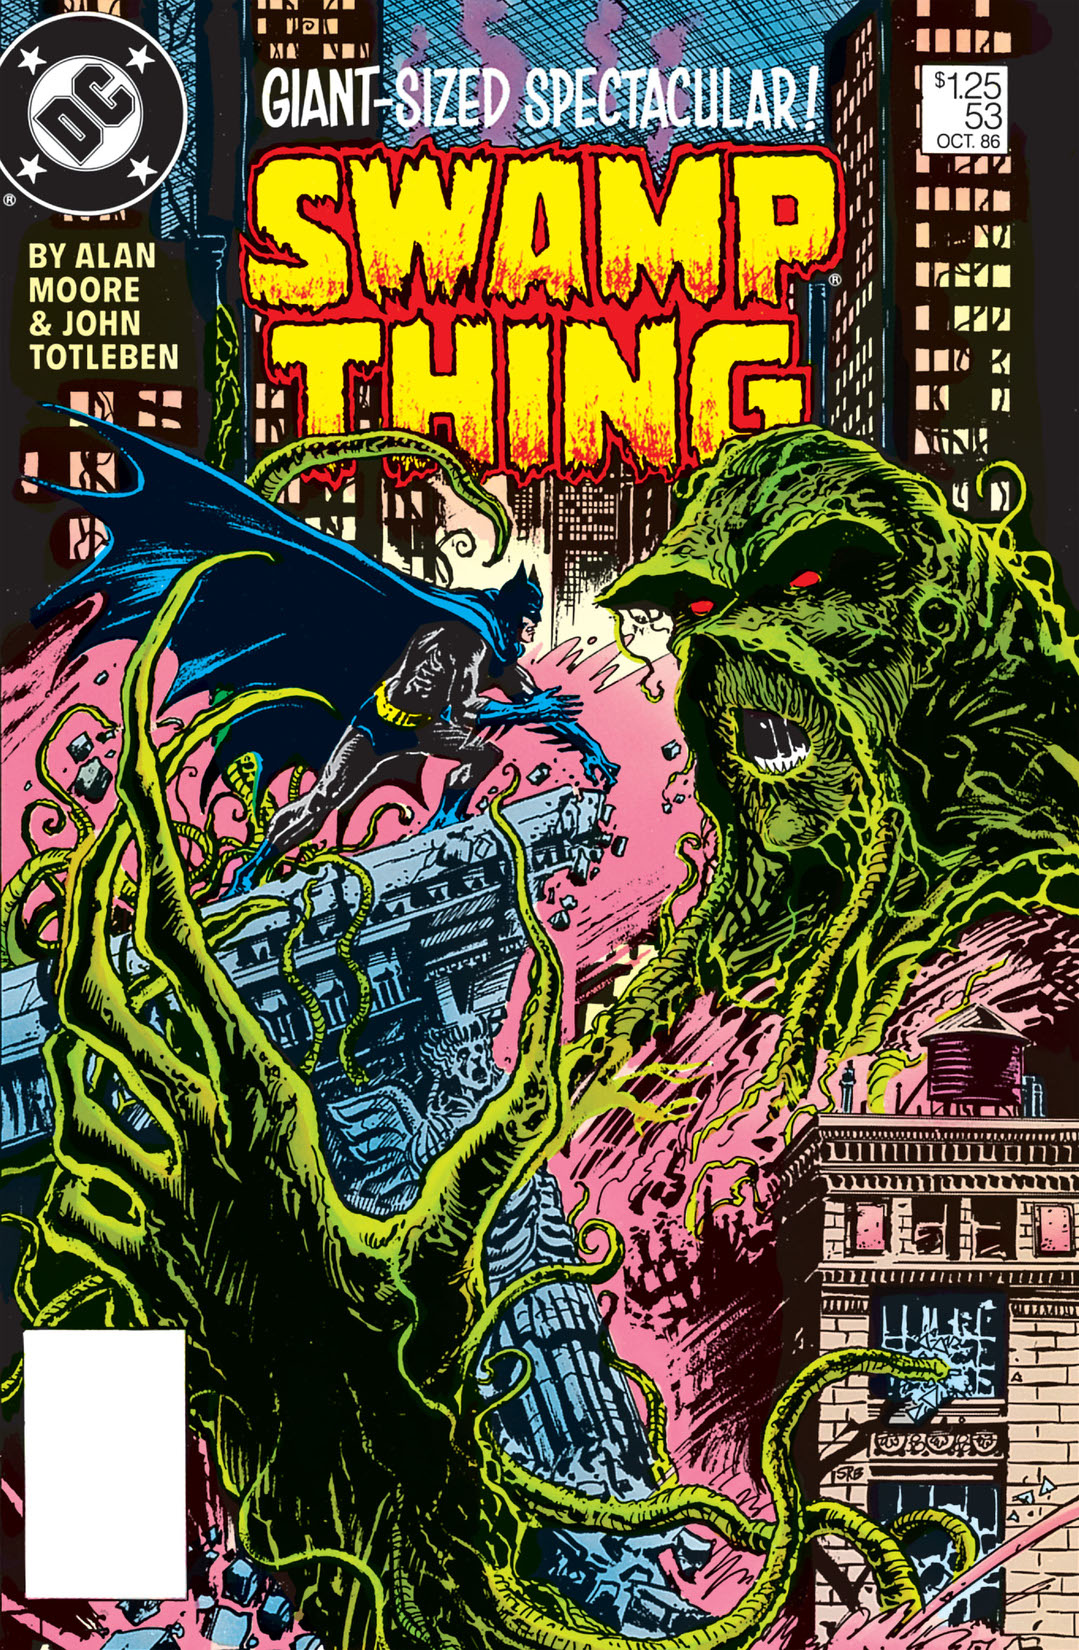 Swamp Thing (1985-) #53 preview images